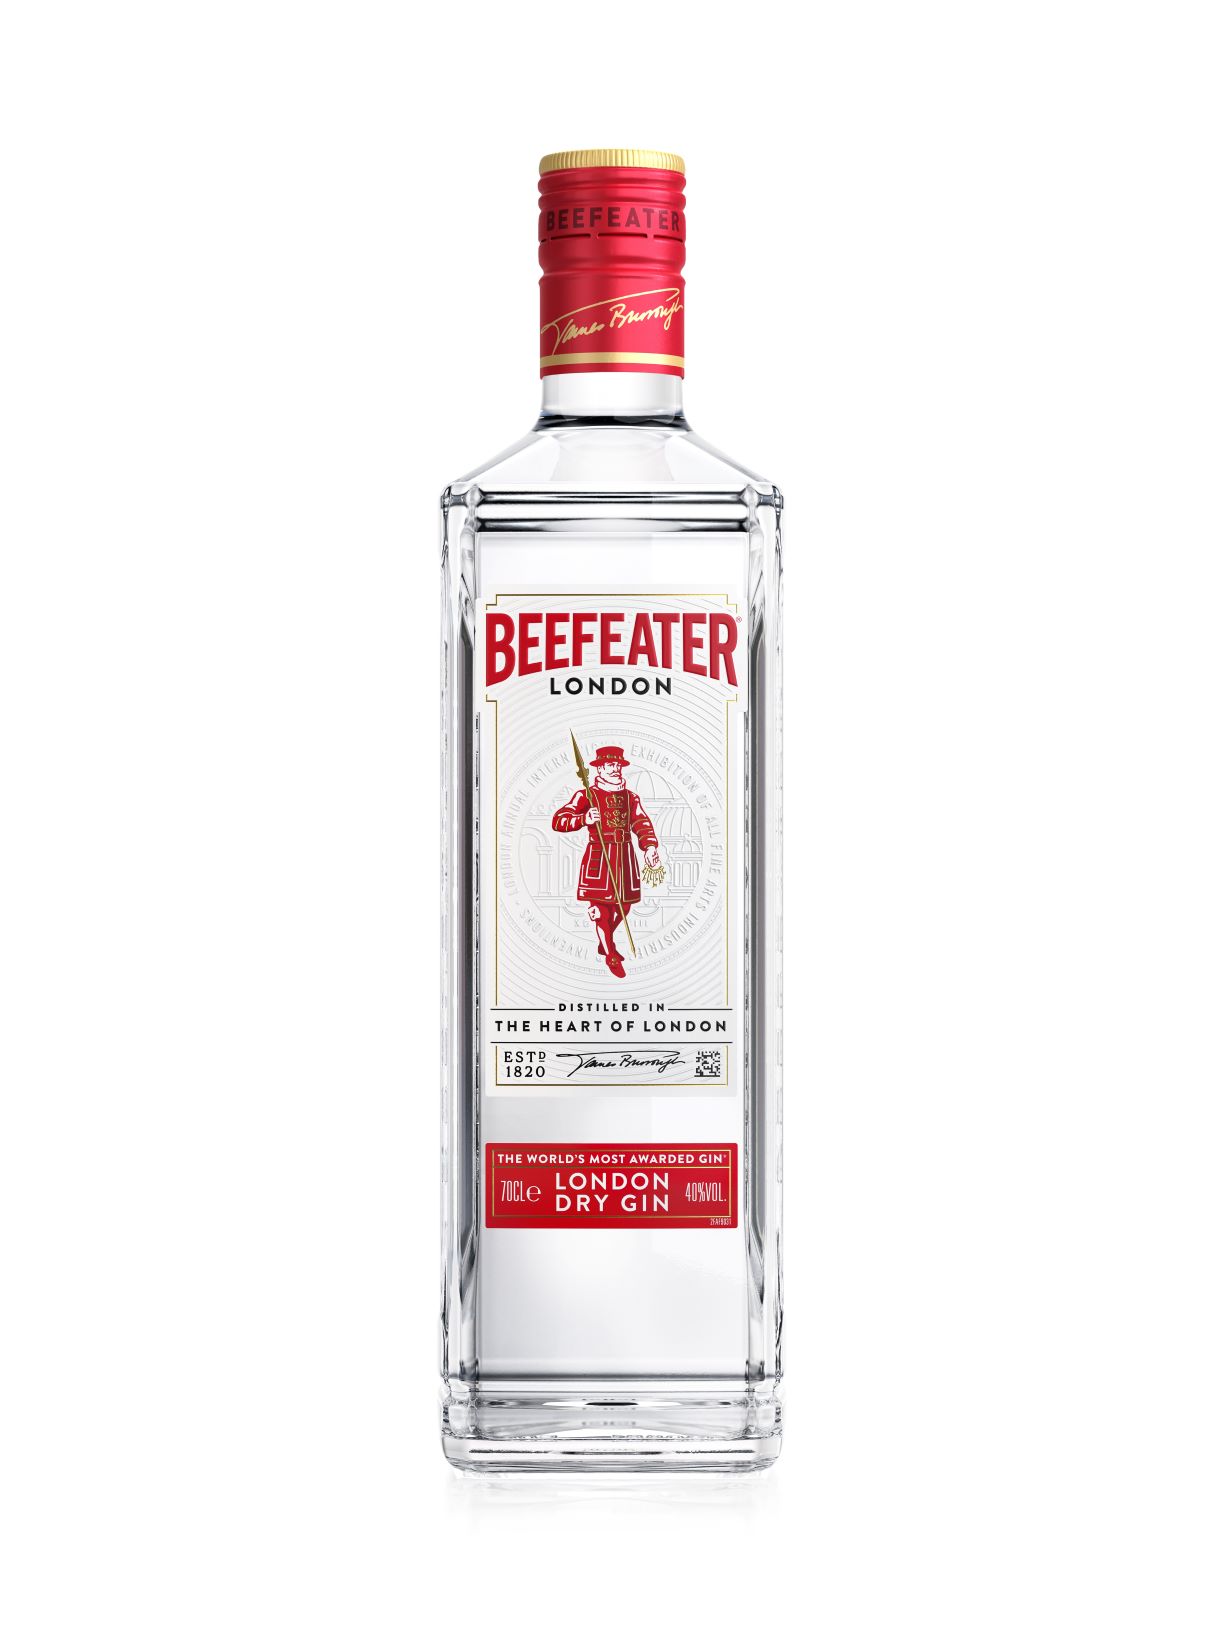 Beefeater unveils stand-out new look